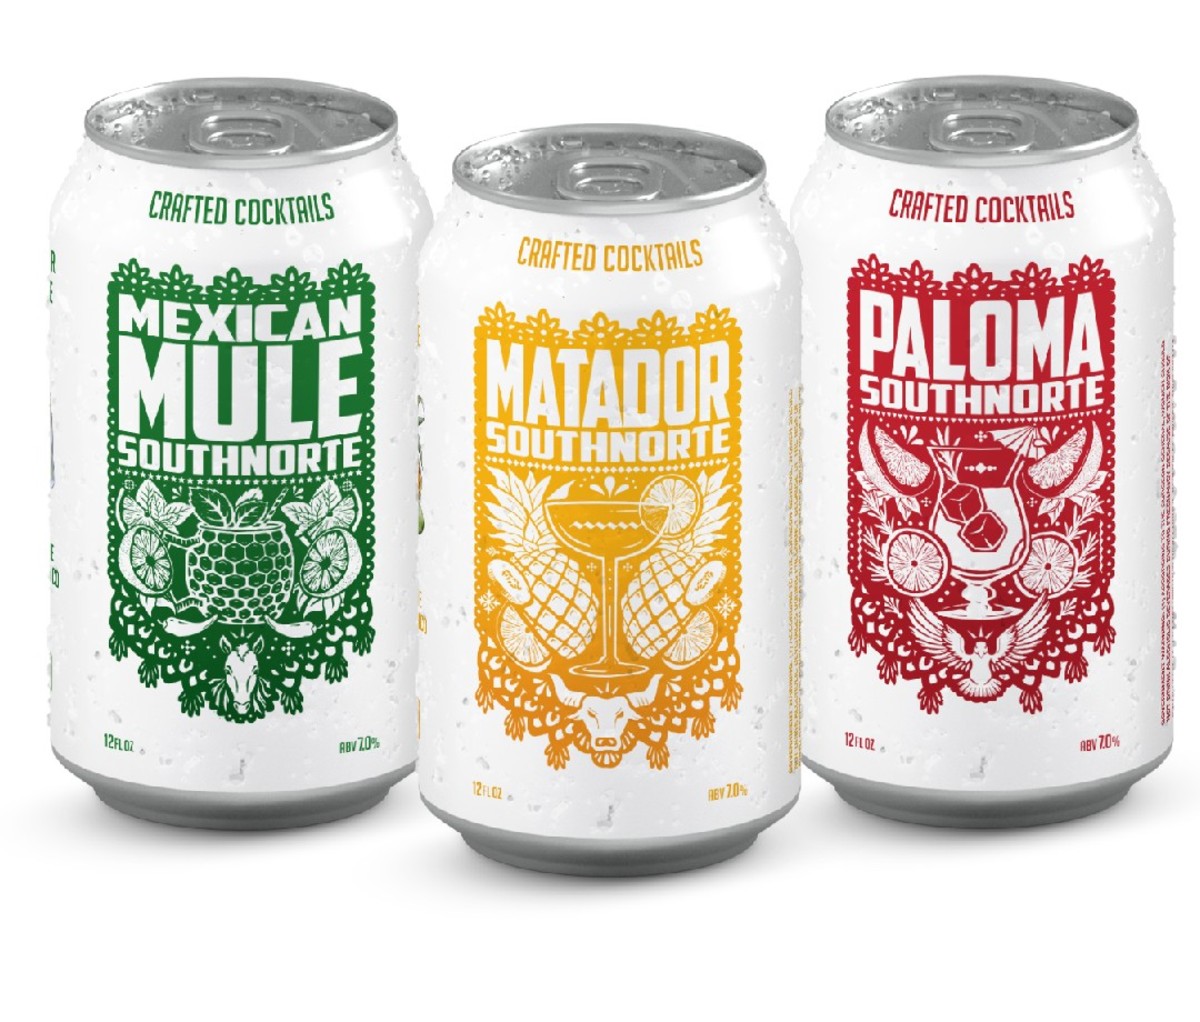 Three SouthNorte canned cocktails